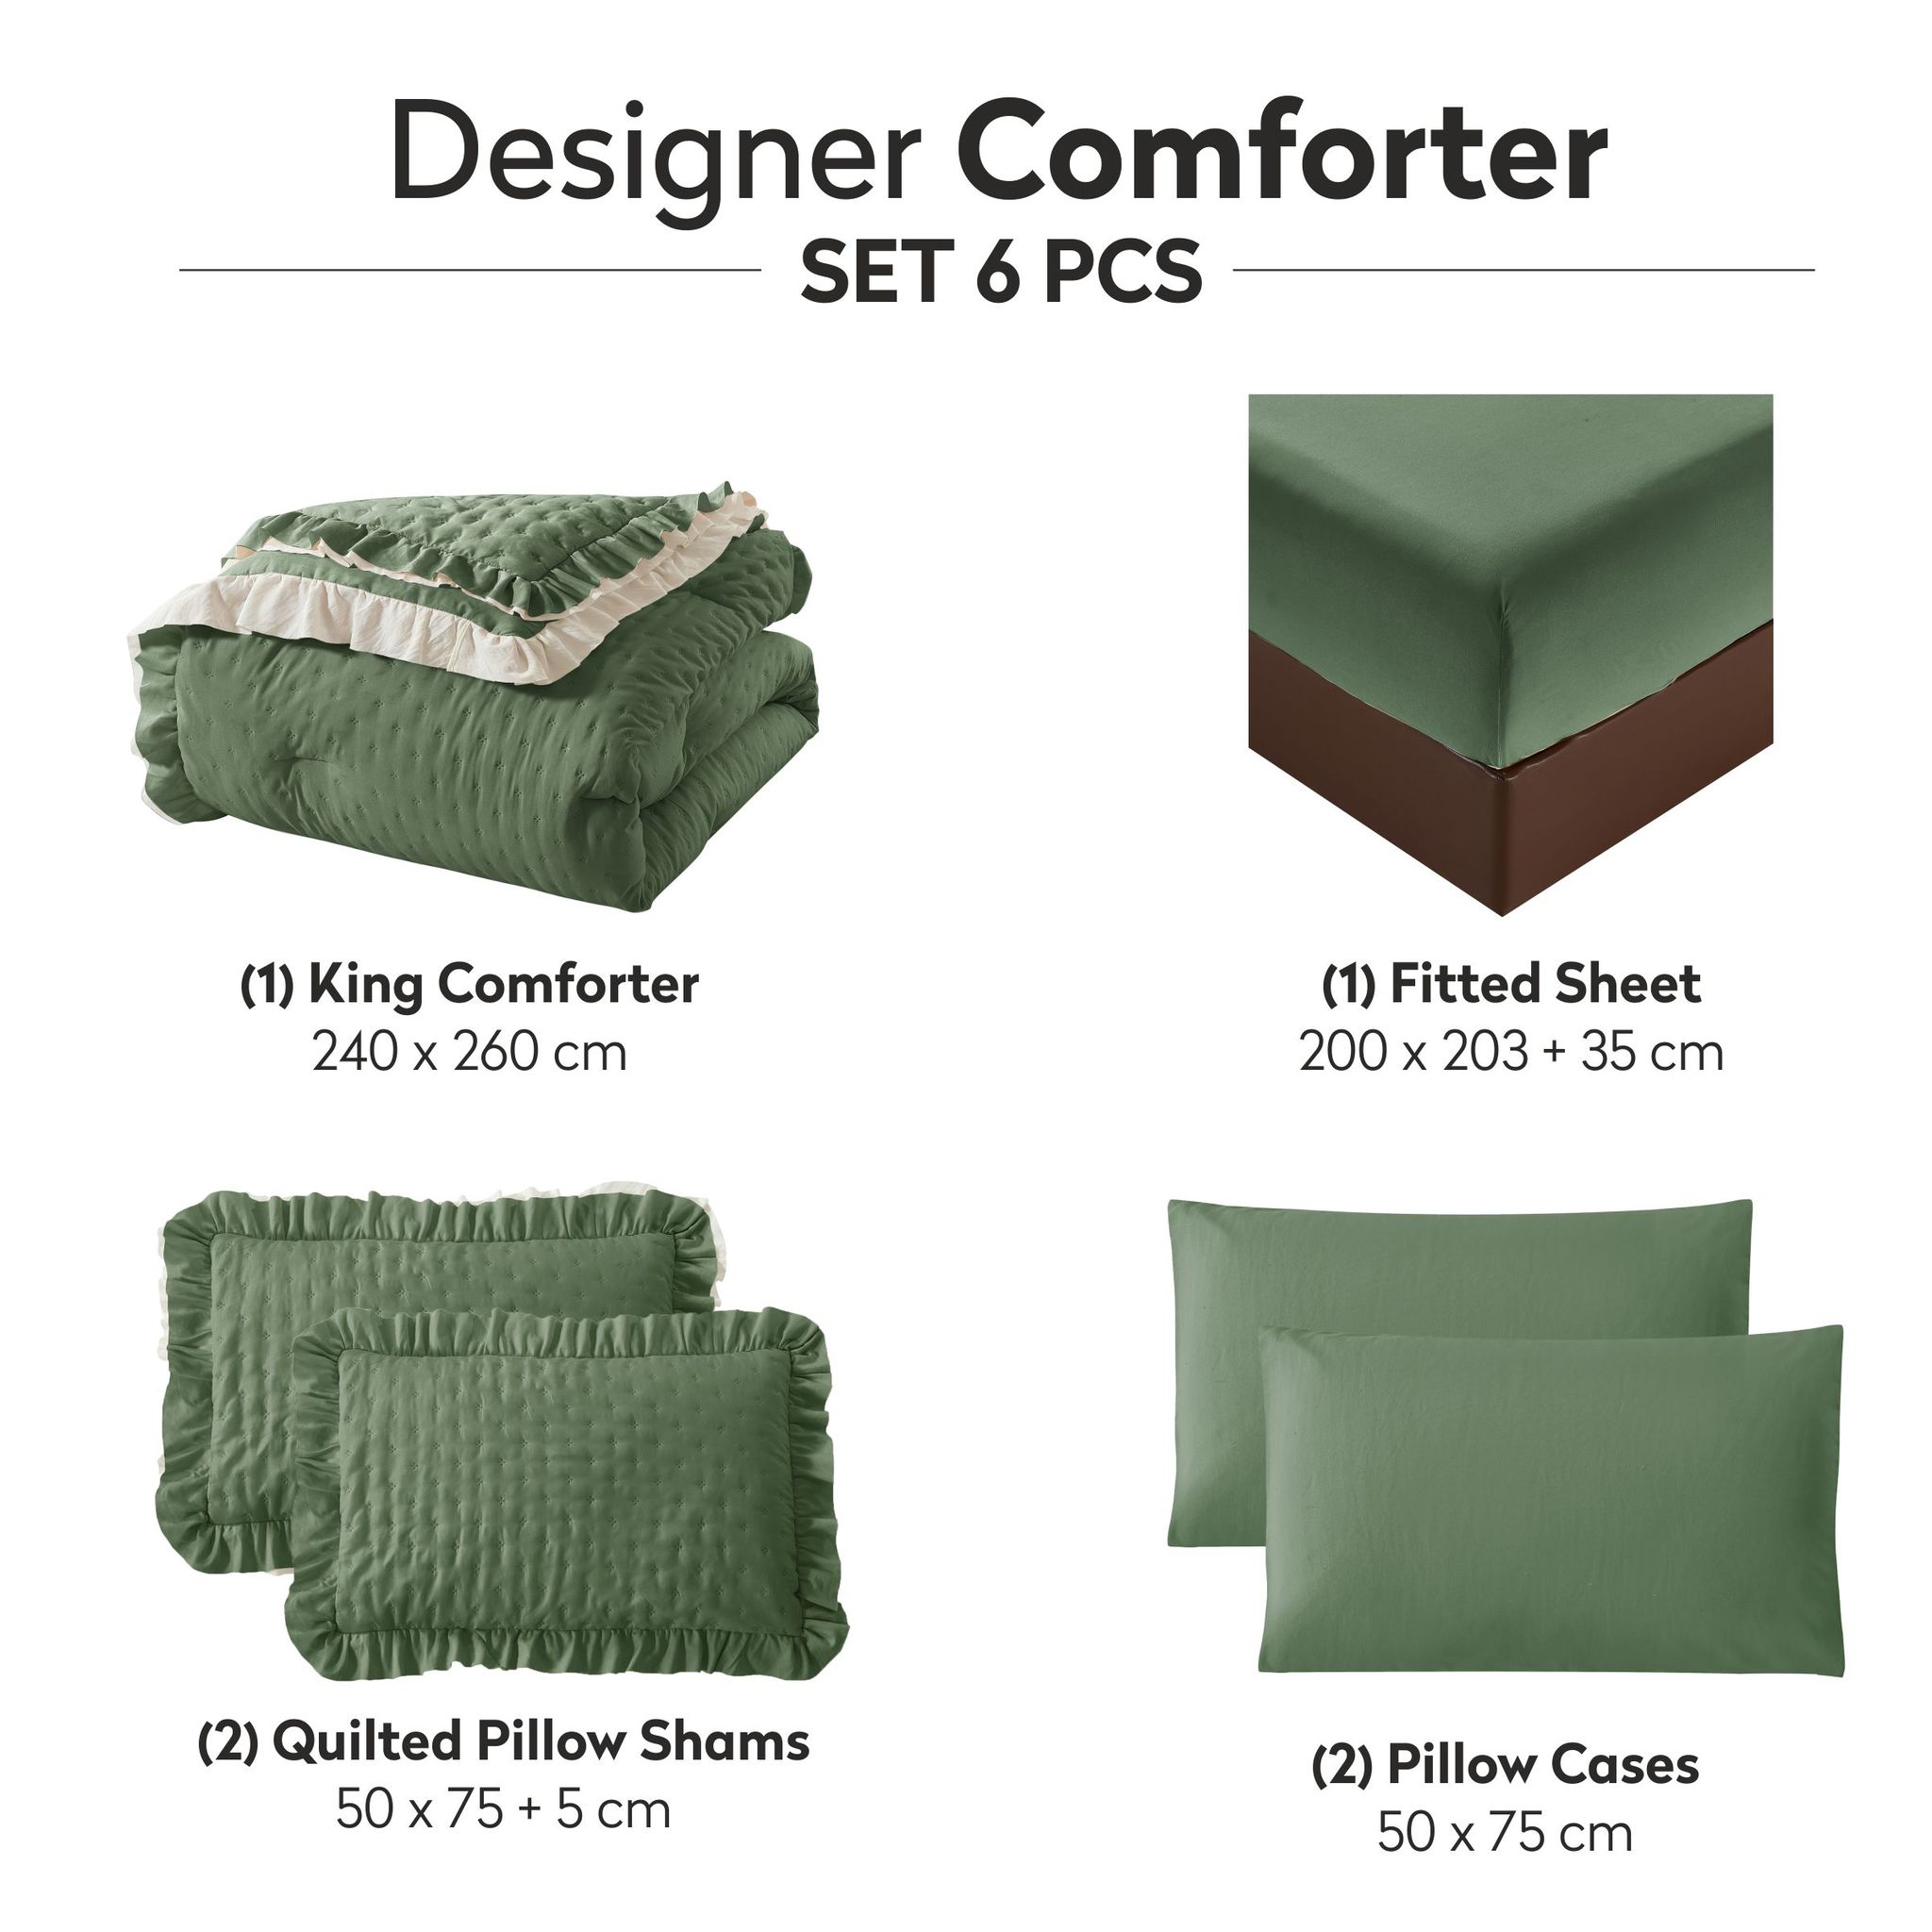 Ruffled Lace Ultrasonic Embroidered Comforter Set 6-Piece King Green